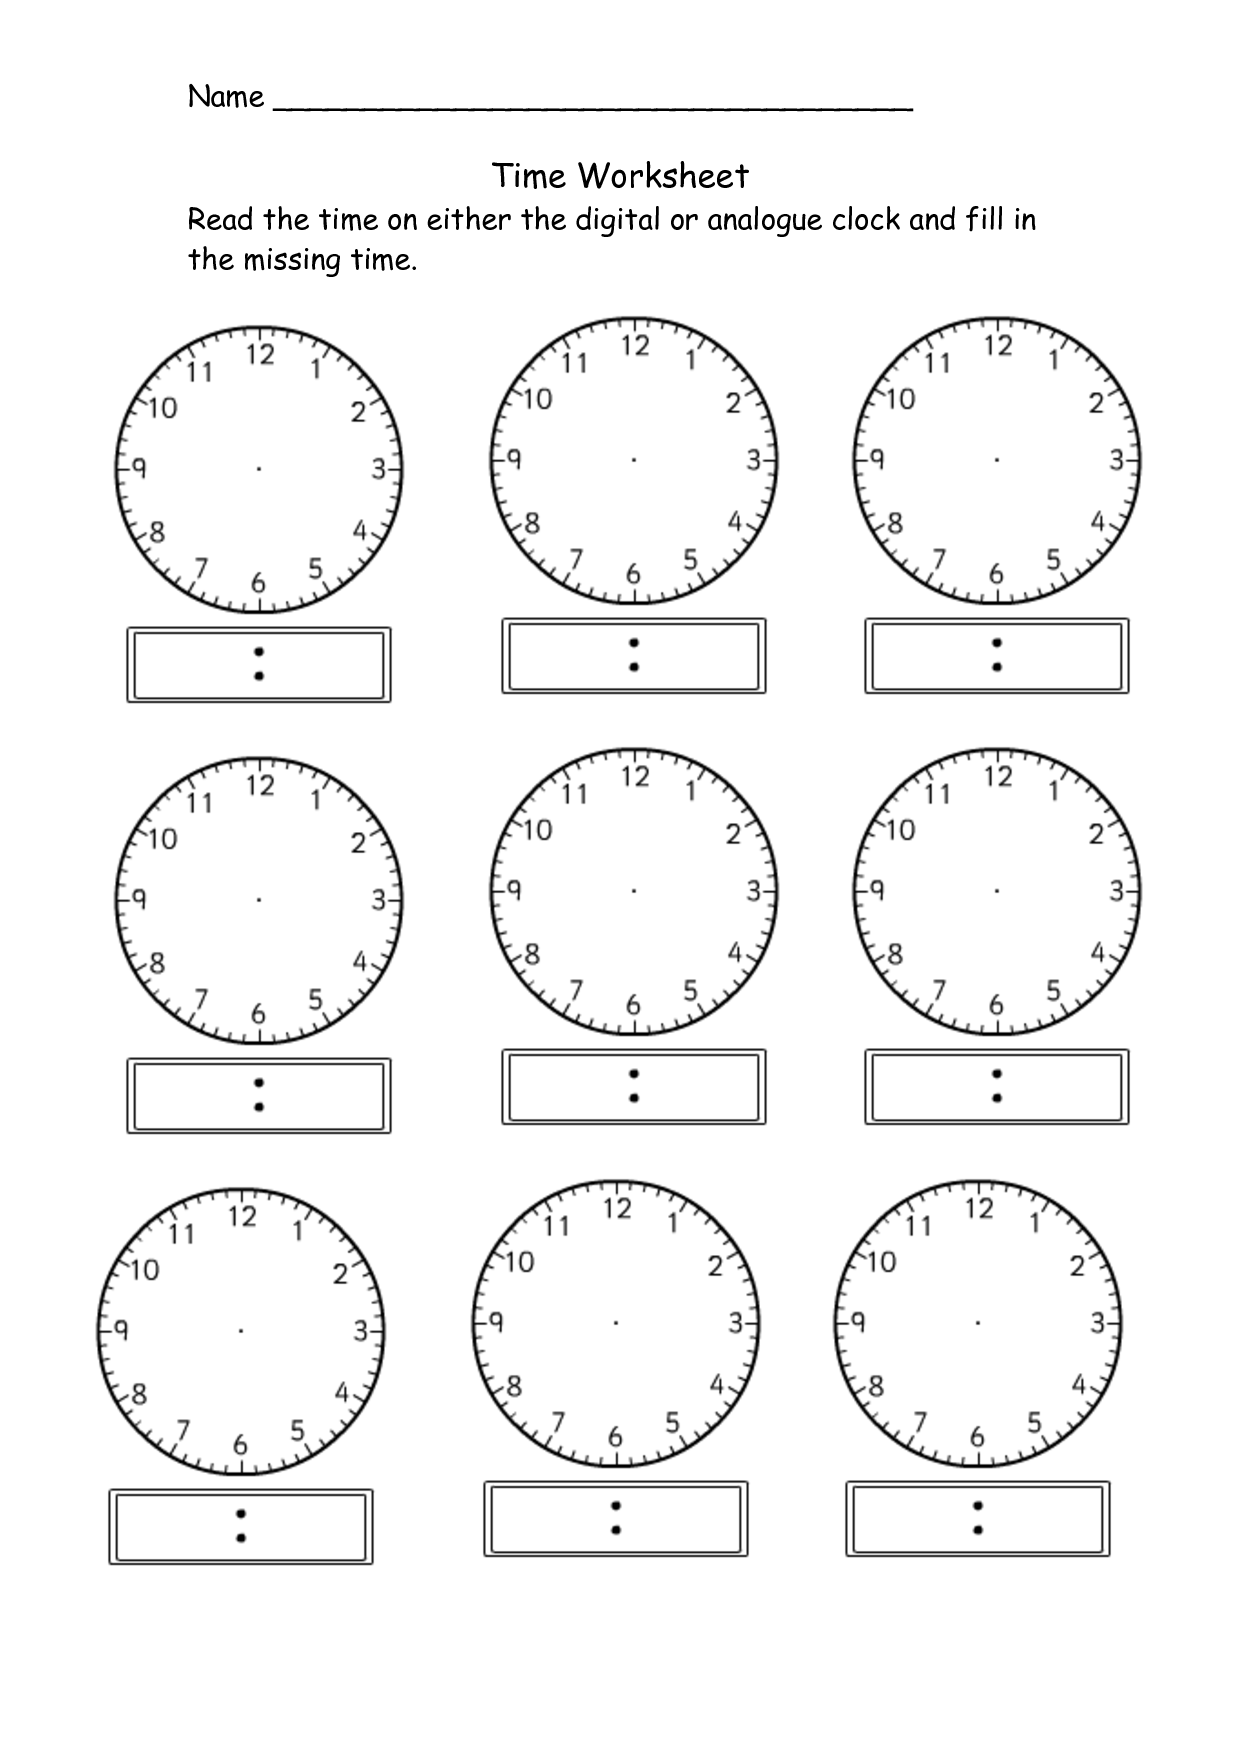 free-blank-analog-clock-download-free-blank-analog-clock-png-images-free-cliparts-on-clipart